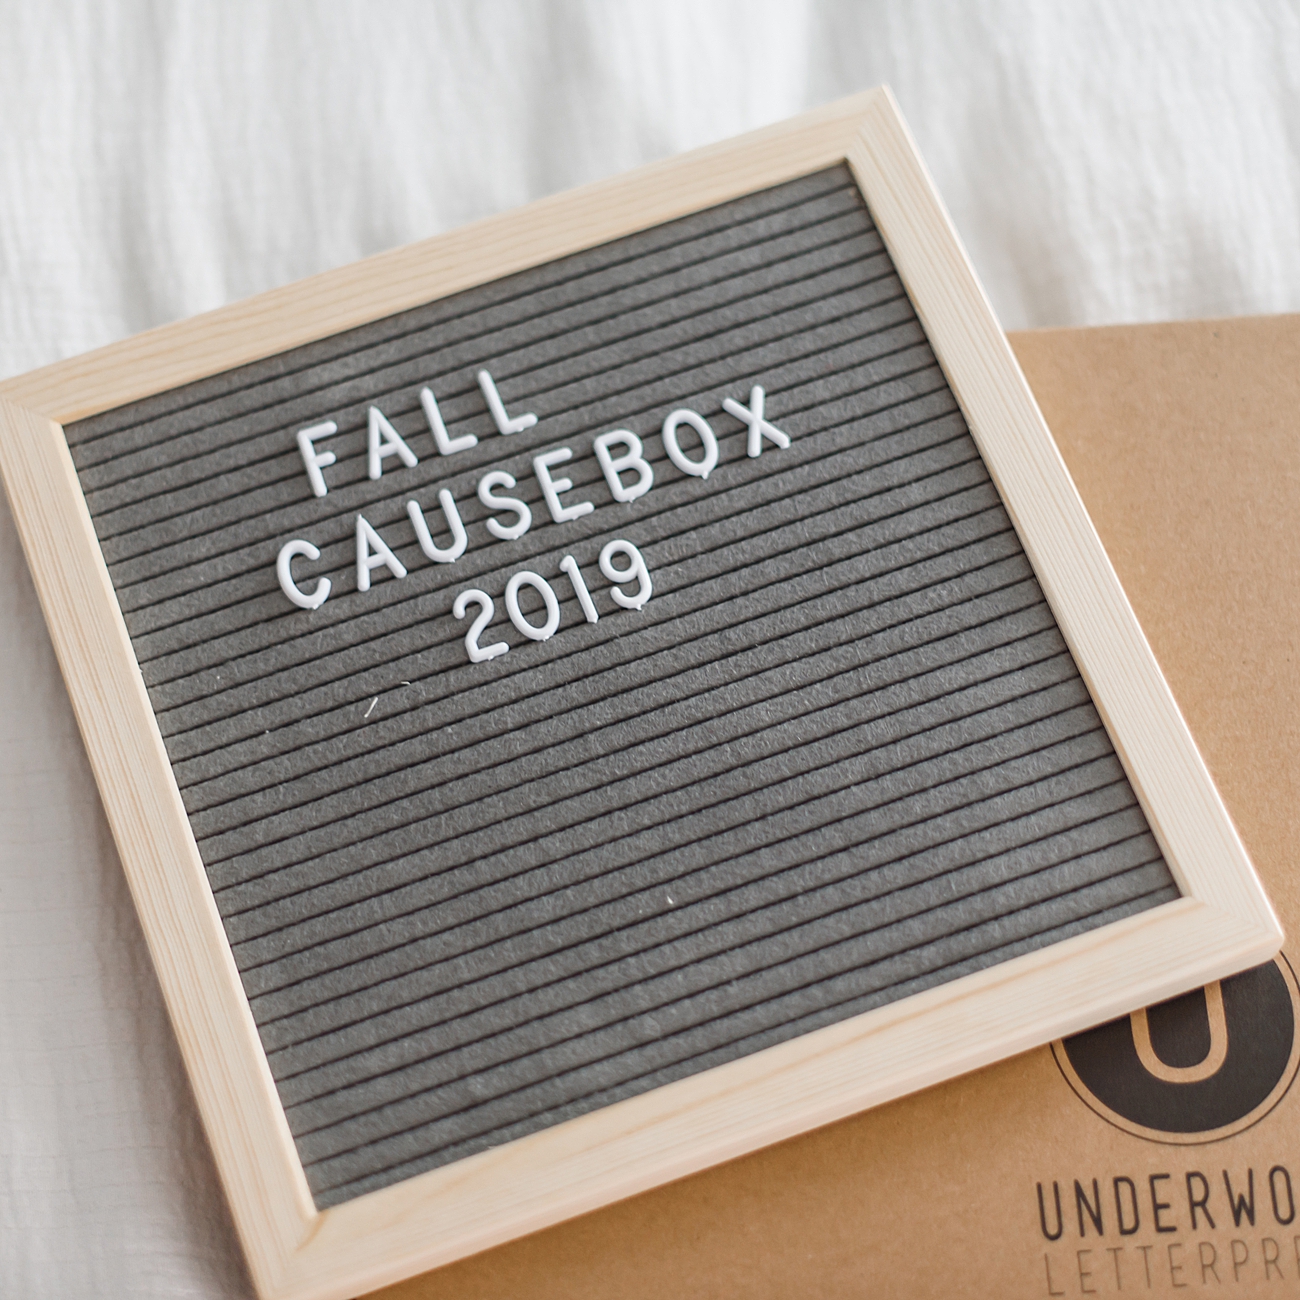 Fall 2019 CAUSEBOX Ethical Subscription Box Review (5)